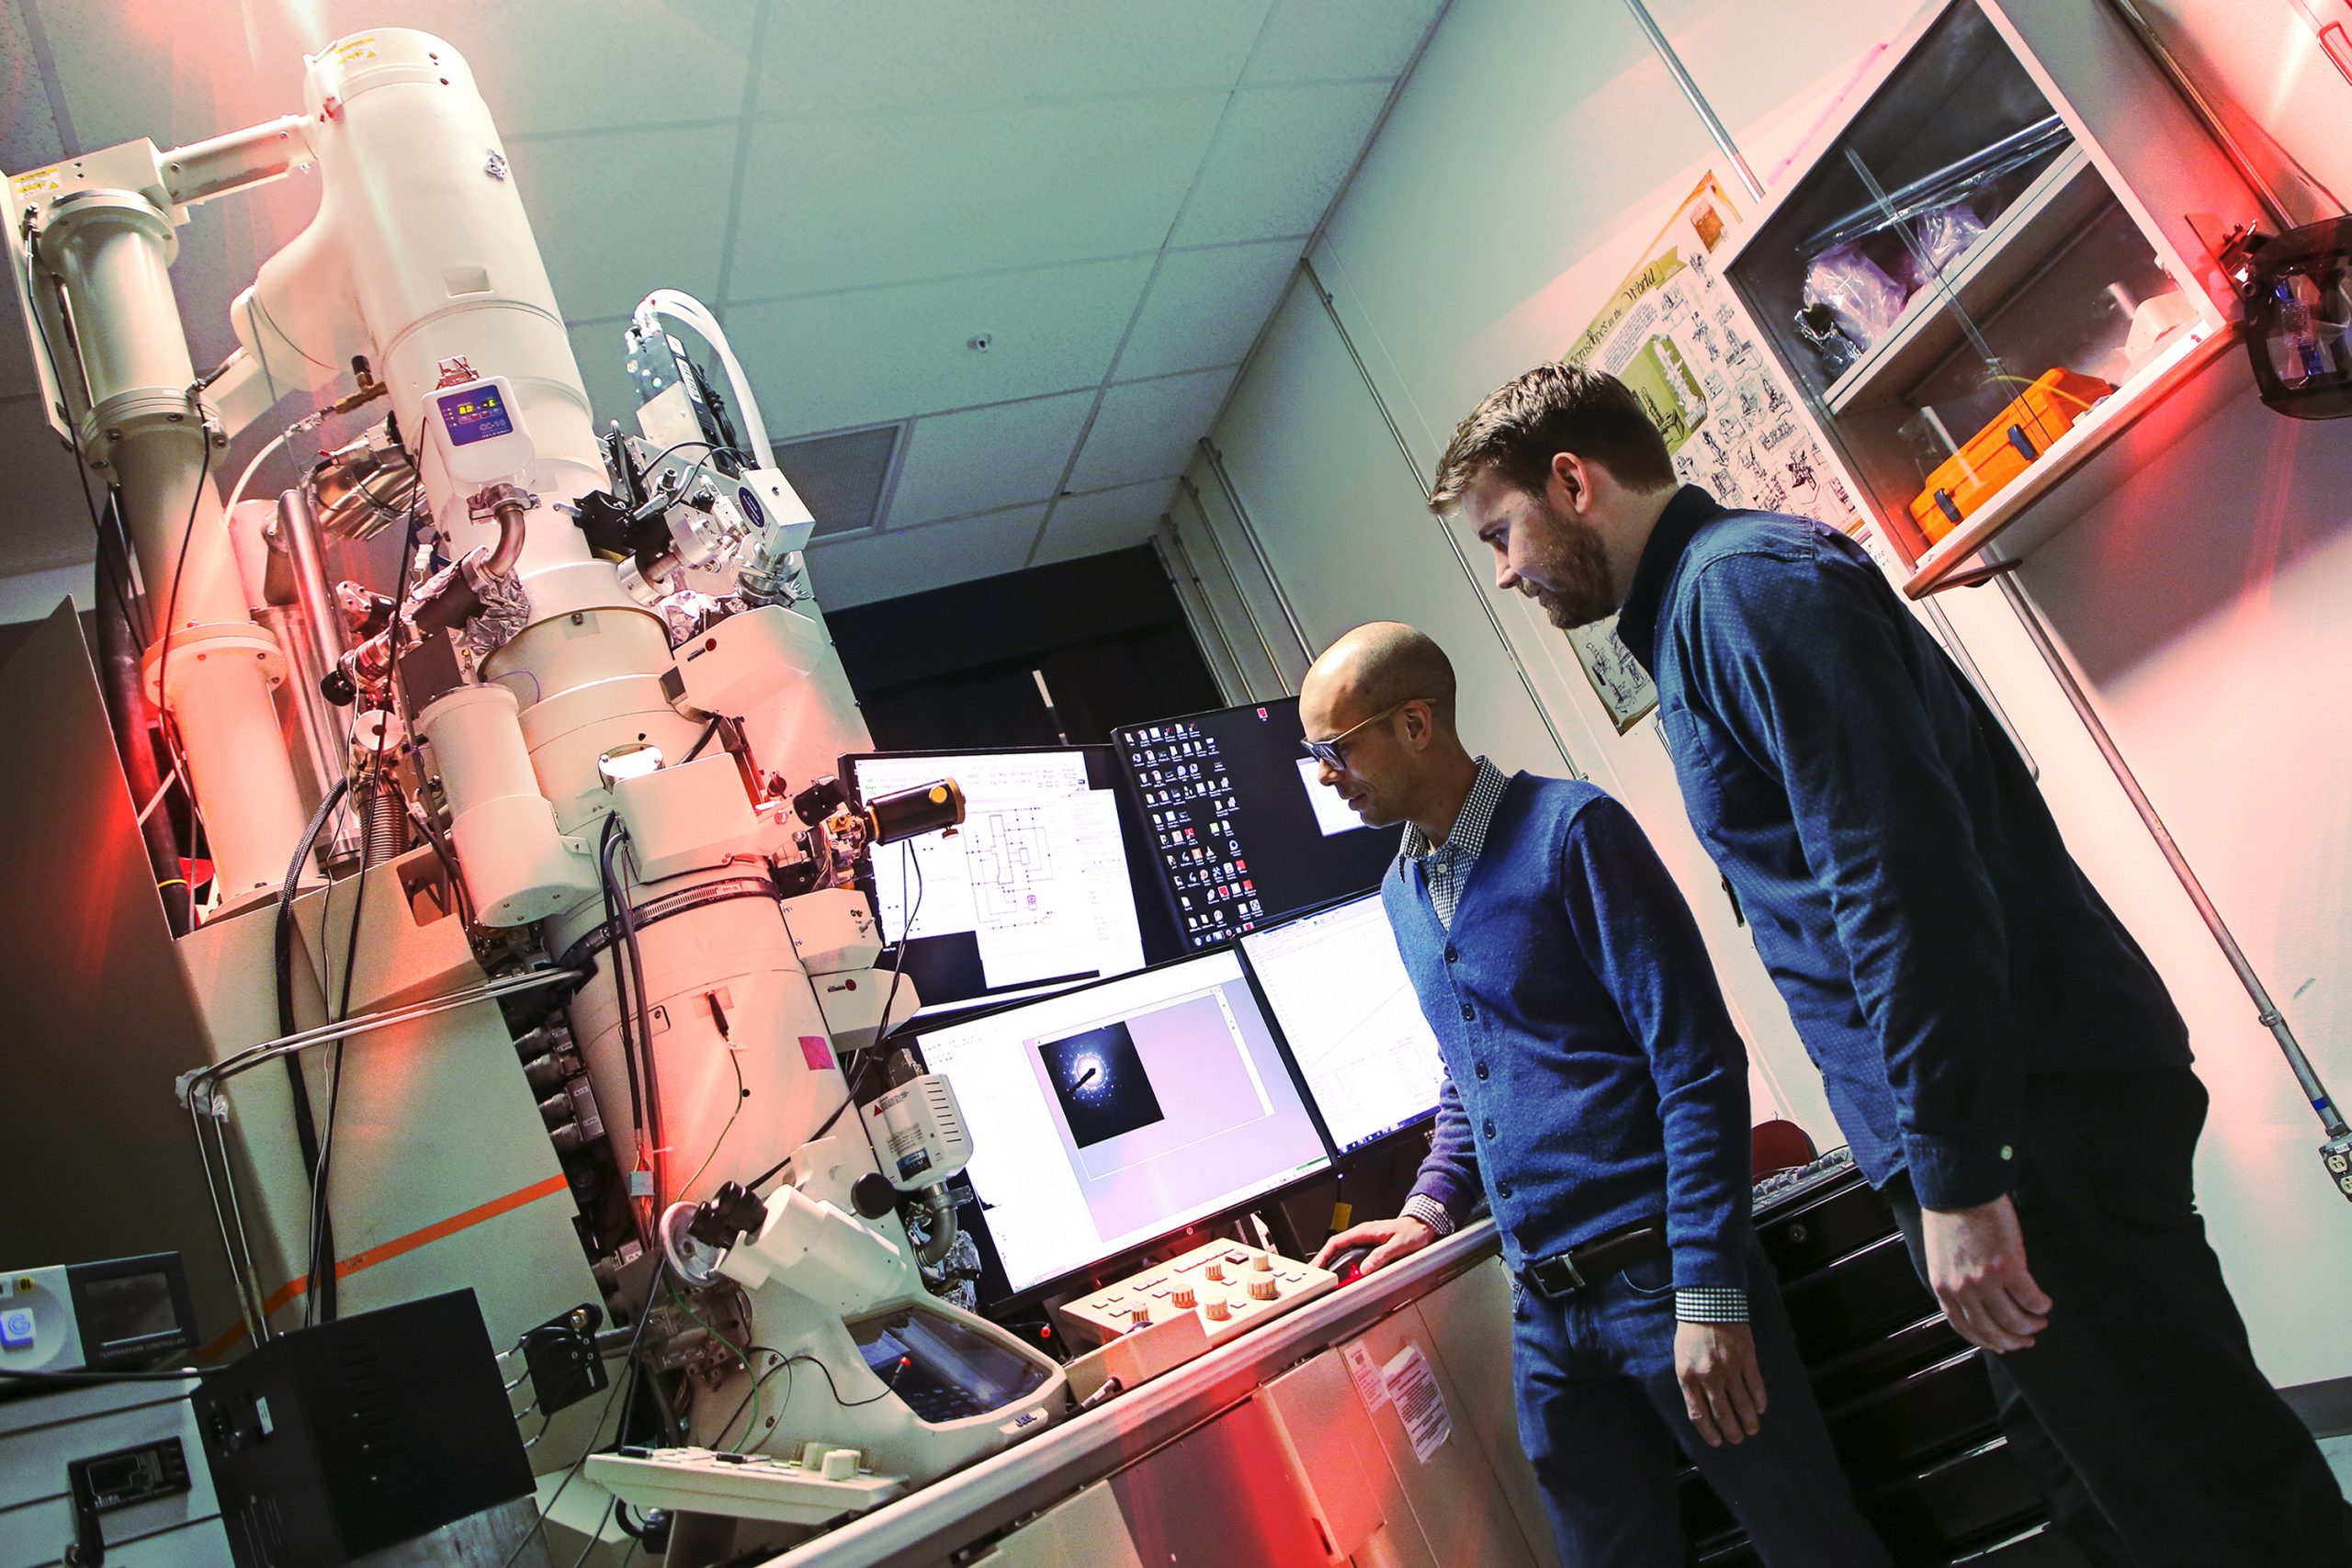 In this photo from 2020, Christopher Barr, right, a former Sandia National Laboratories postdoctoral researcher, and University of California, Irvine, professor Shen Dillon operate the In-situ Ion Irradiation Transmission Electron Microscope. Barr was part of a Sandia team that used the one-of-a-kind microscope to study atomic-scale radiation effects on metal. (Photo by Lonnie Anderson)